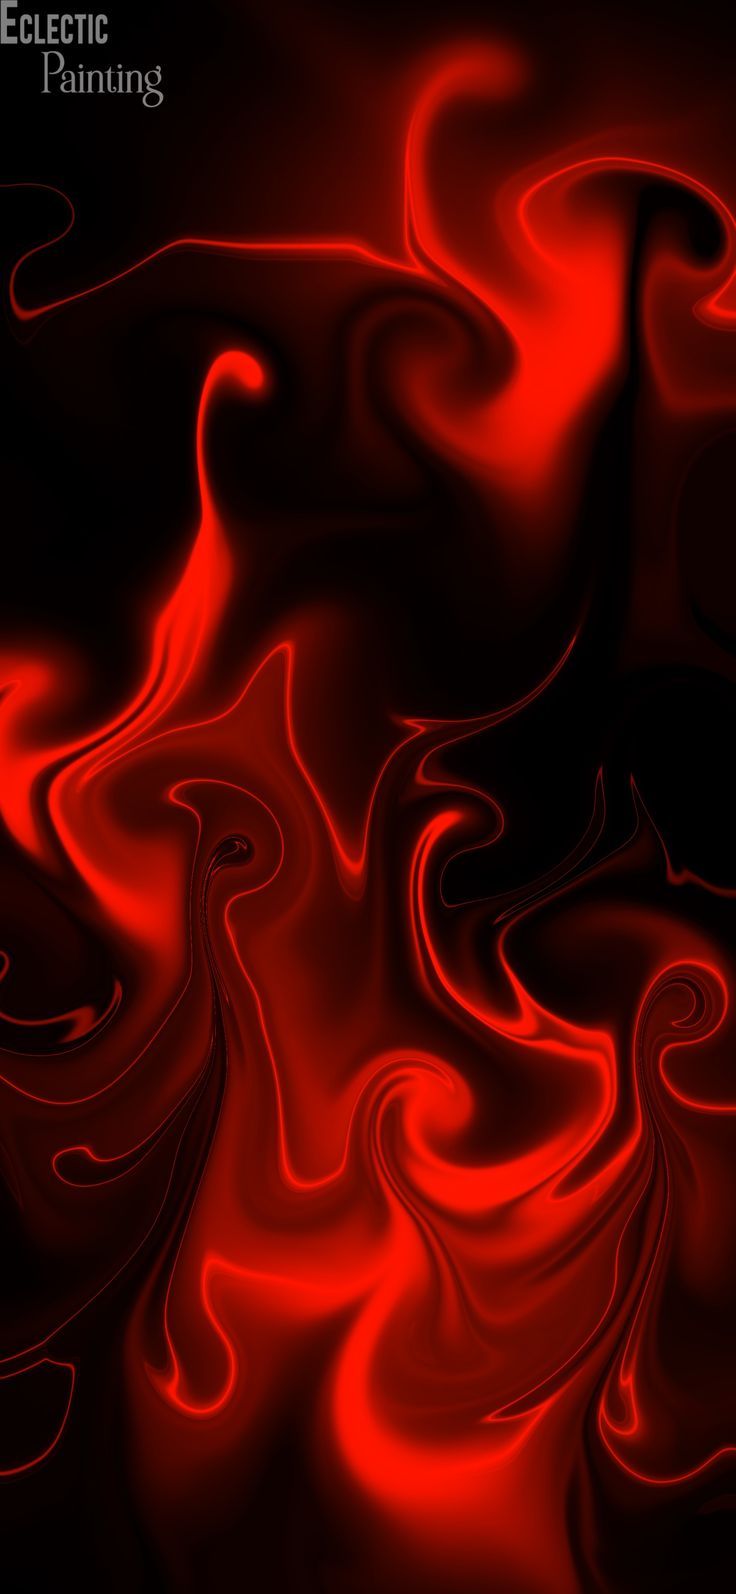 Download free hd iphone wallpaper with abstract soft red tendril swirls free iphone wallpaper eclectic paintings graffiti wallpaper